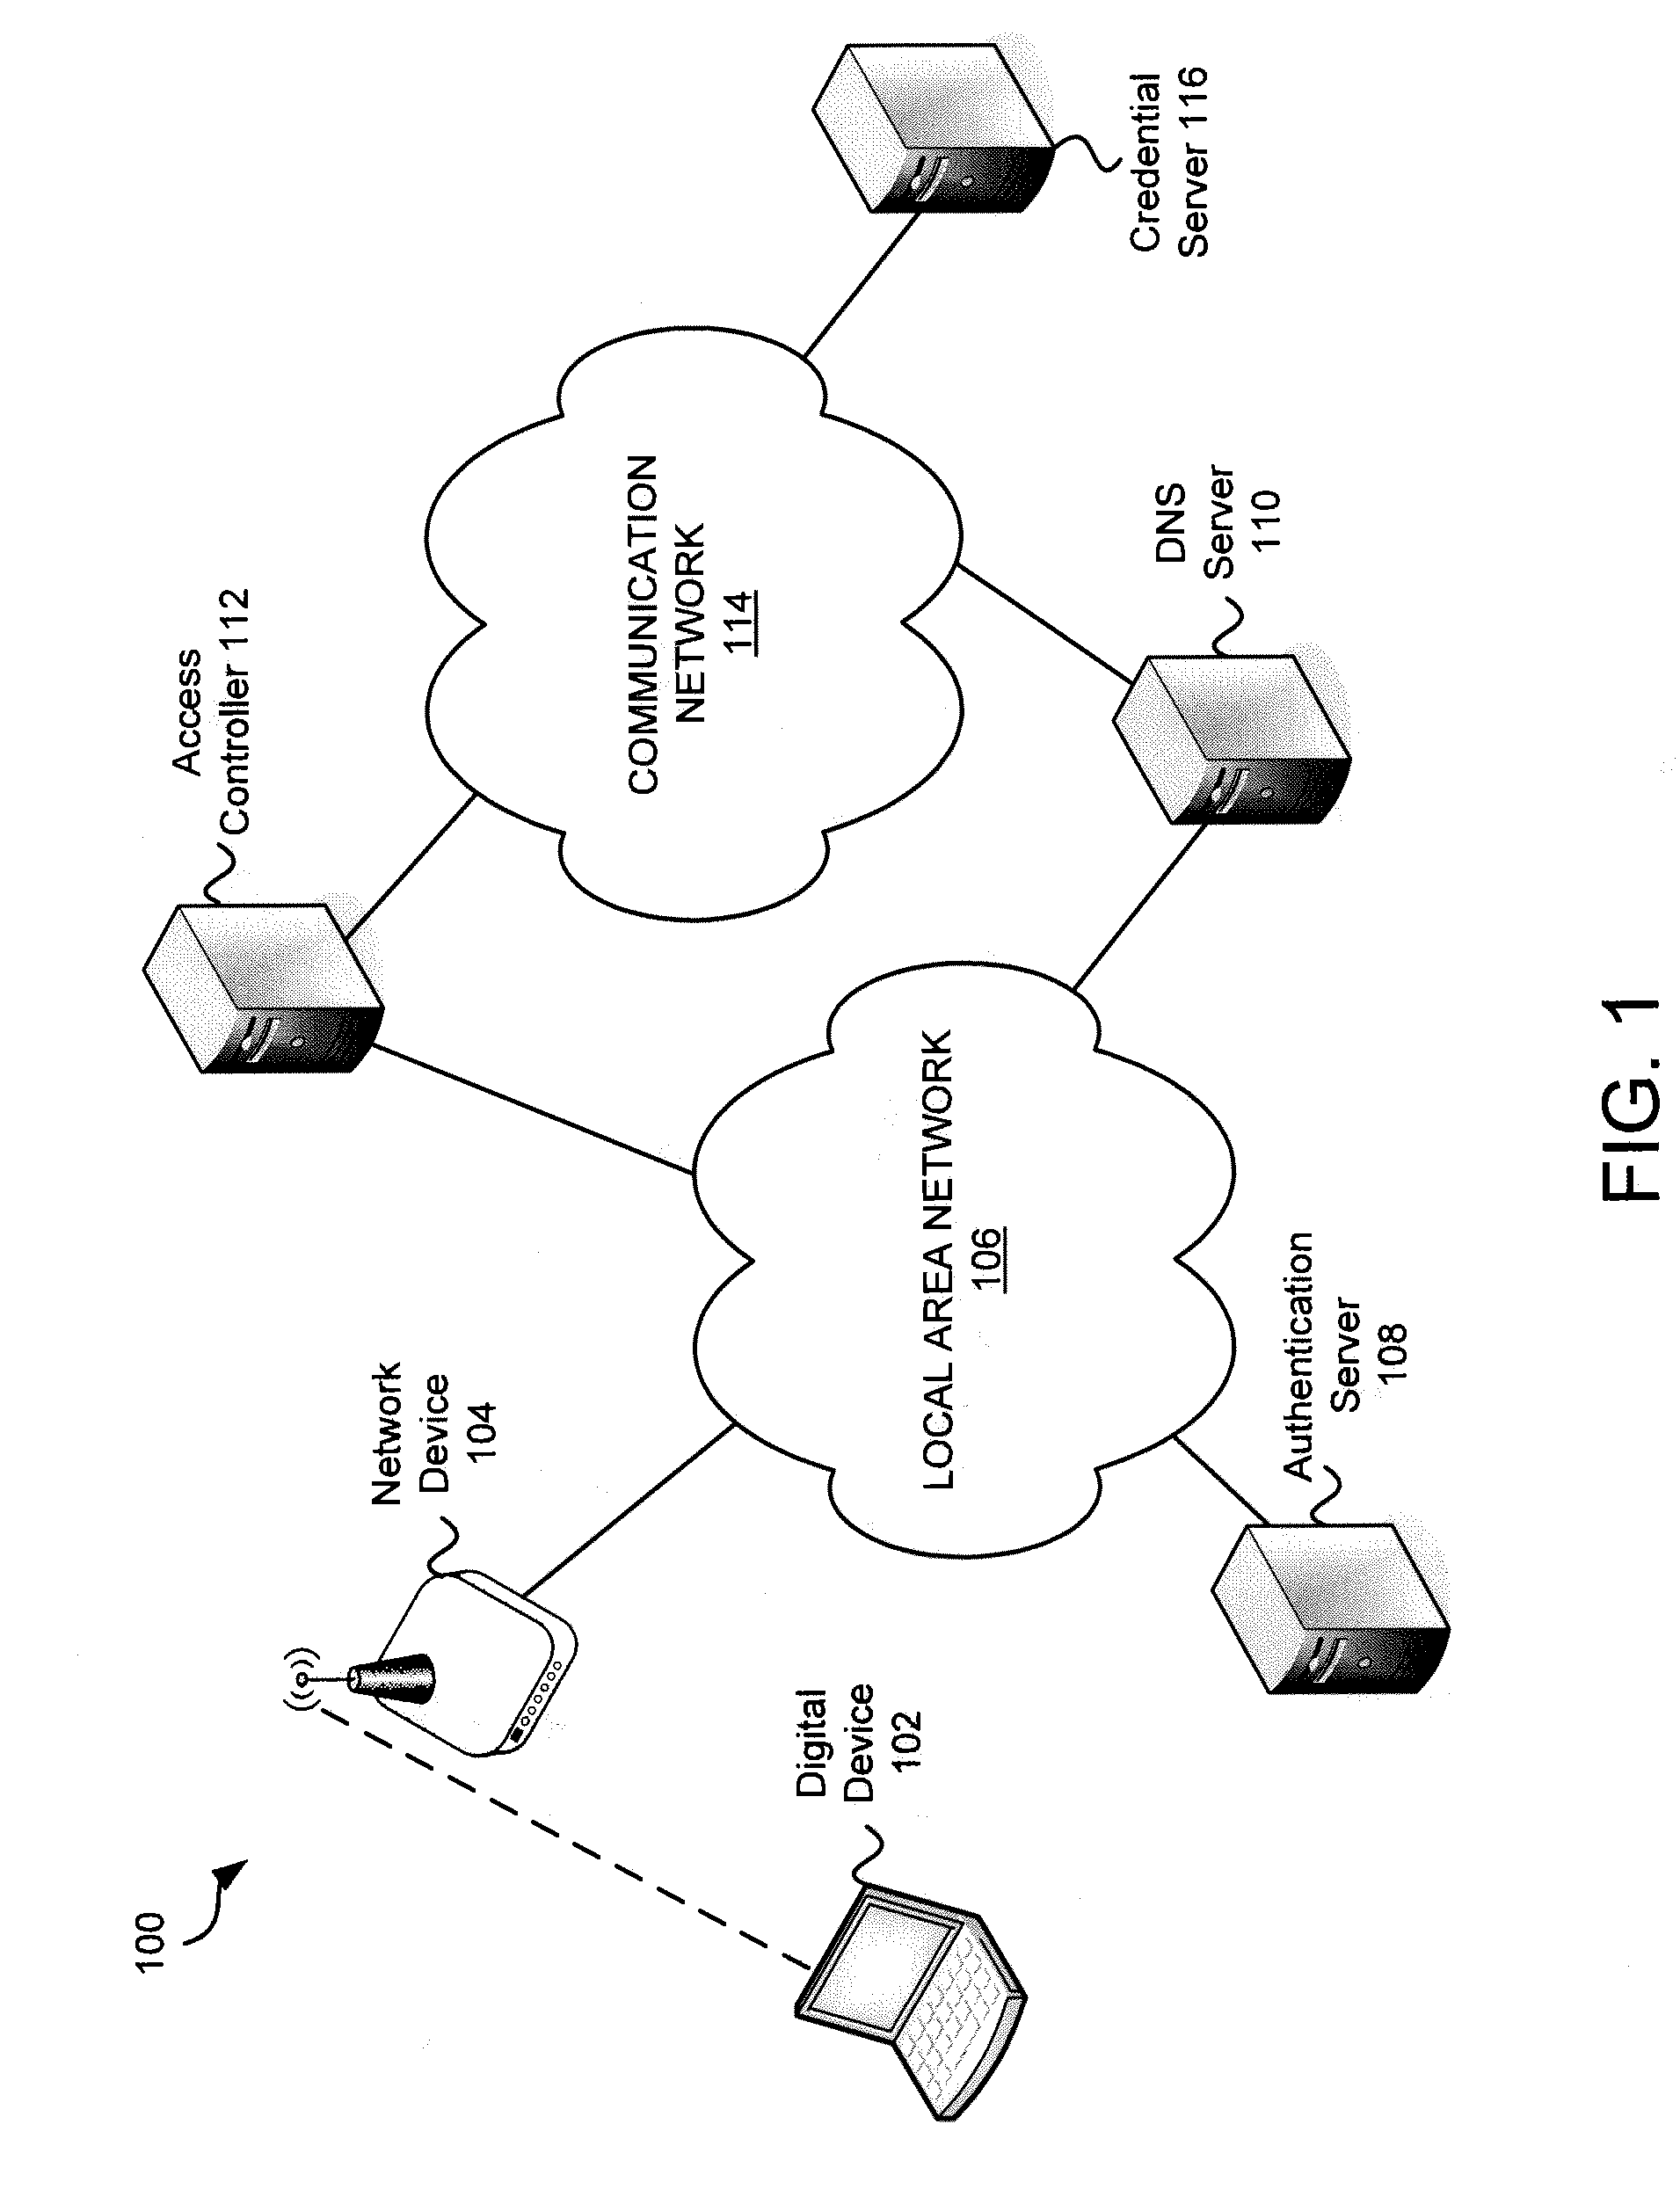 Systems and Methods for Identifying a Network